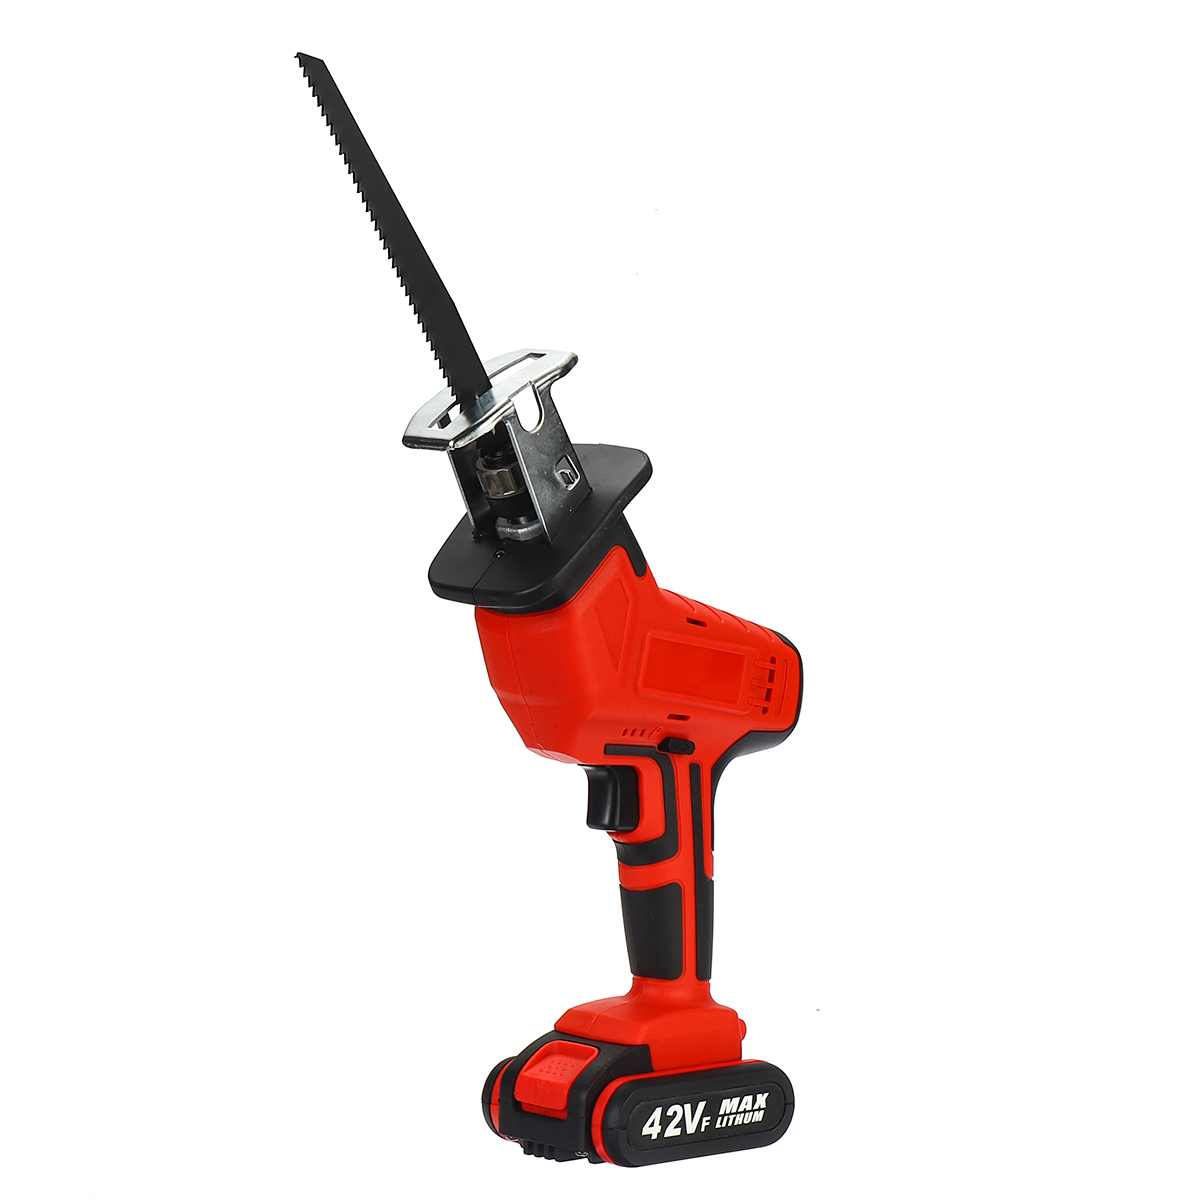 42VF-13000mAh-Cordless-Reciprocating-Saw-Electric-Saws-Portable-Woodworking-Power-Tools-1640981-7